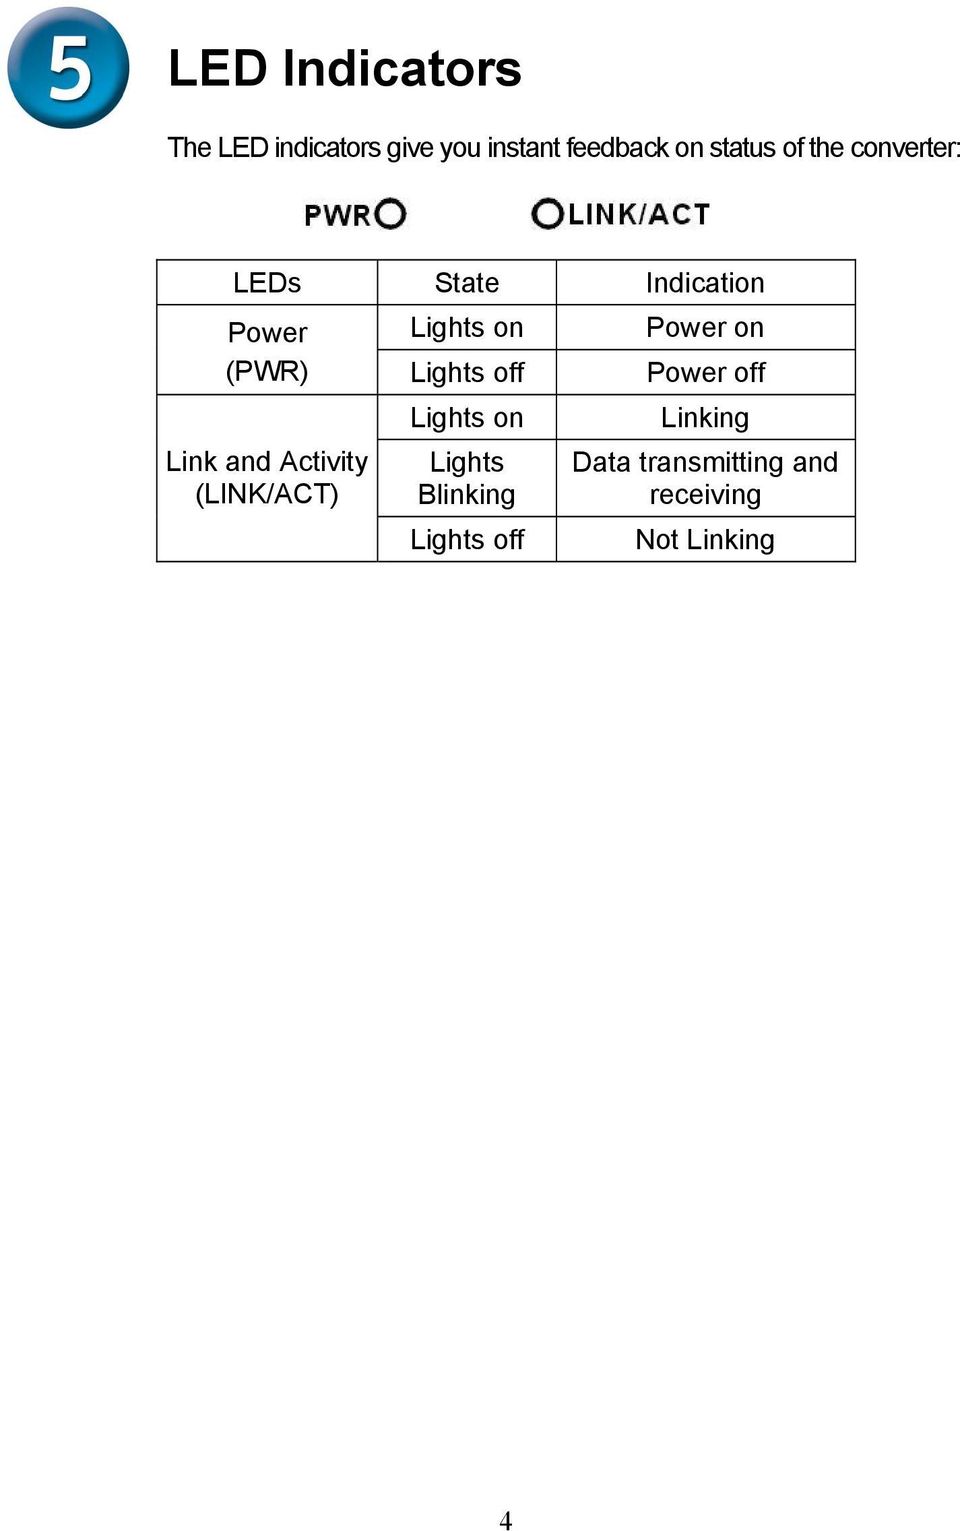 Lights off Power off Link and Activity (LINK/ACT) Lights on Lights